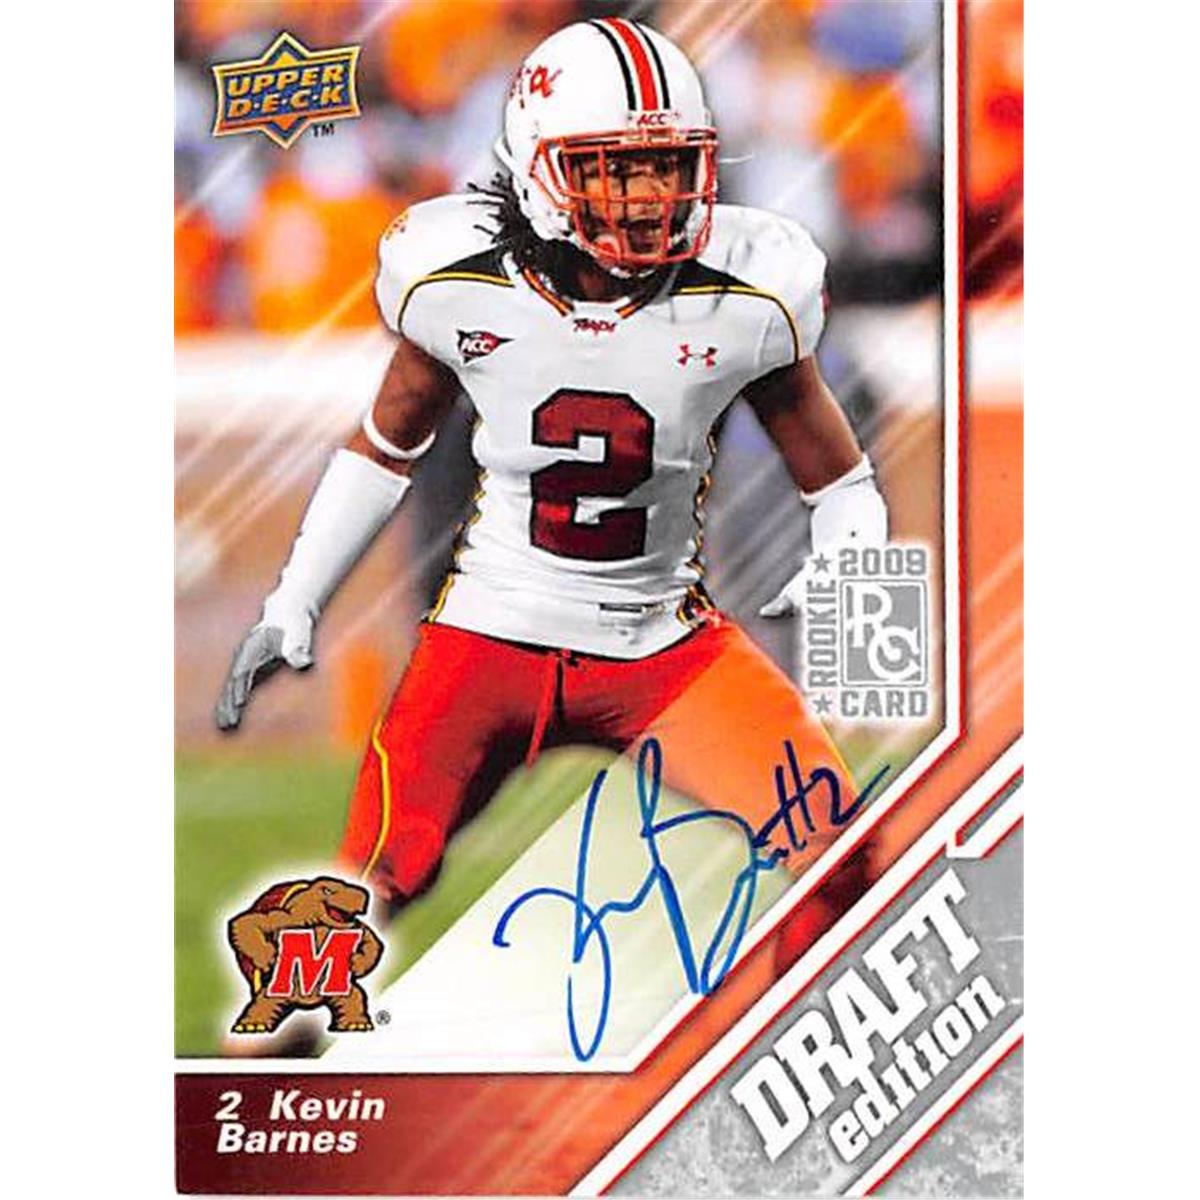 Picture of Autograph Warehouse 366565 Kevin Barnes Autographed Football Card - 2009 Upper Deck Draft Rookie 25